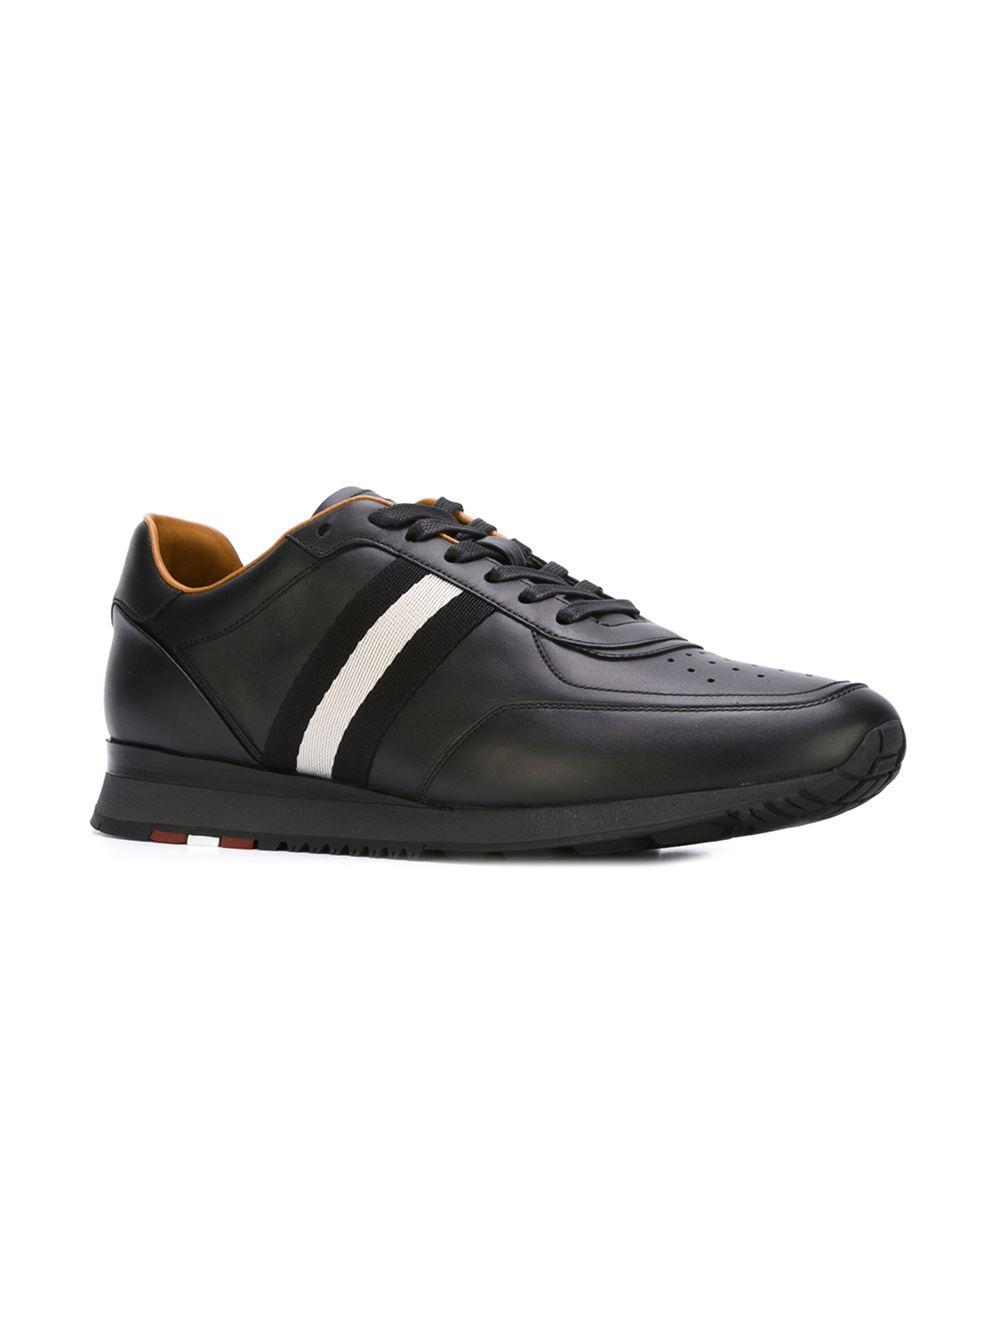 Bally Leather 'aston' Sneakers in Black for Men - Lyst